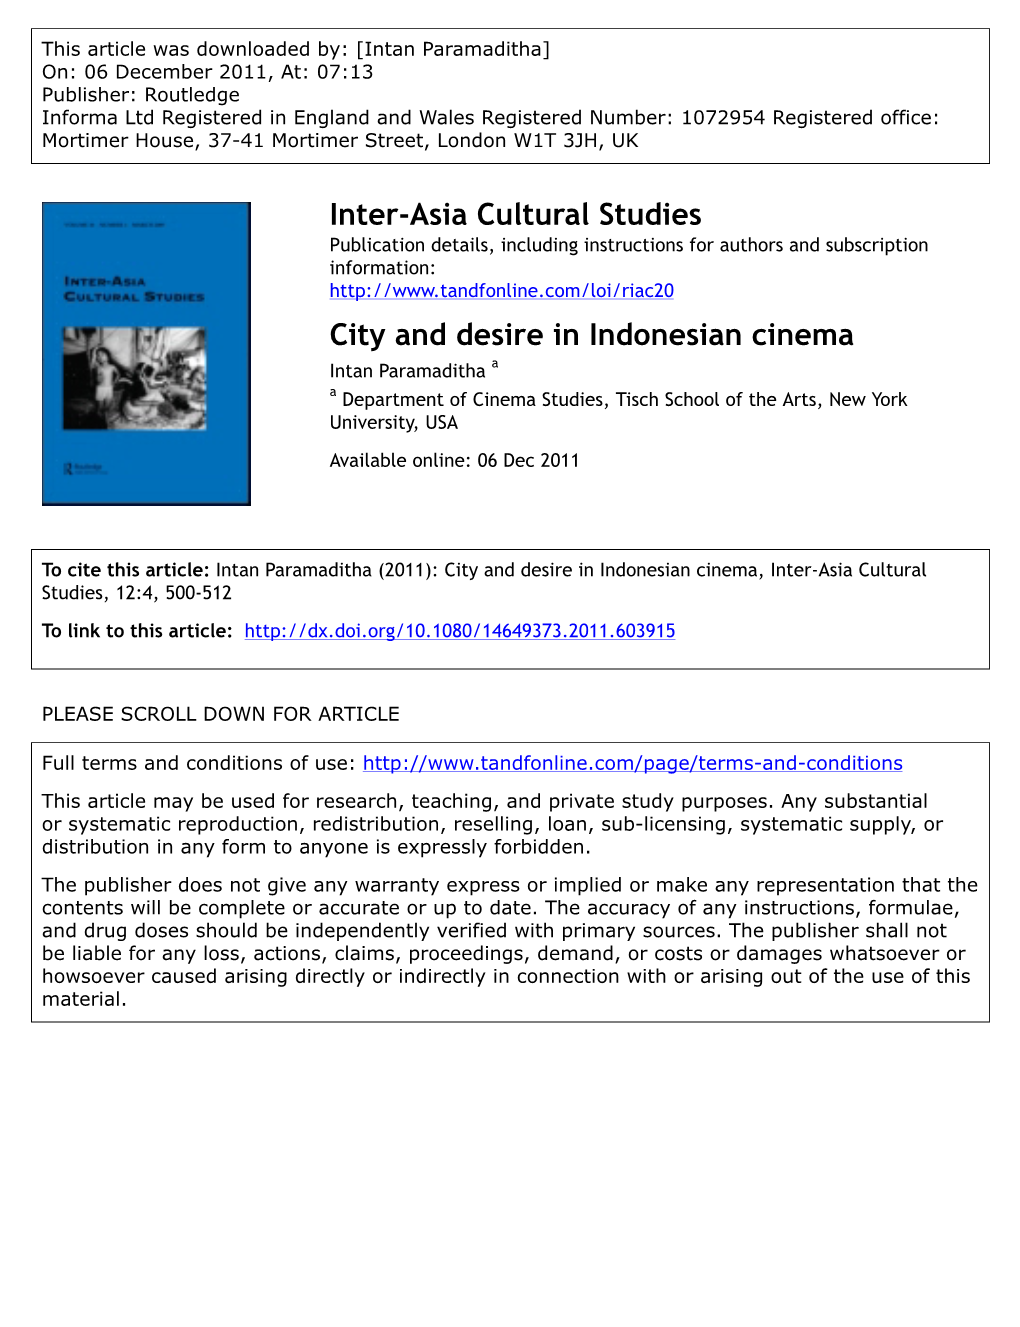 City and Desire in Indonesian Cinema